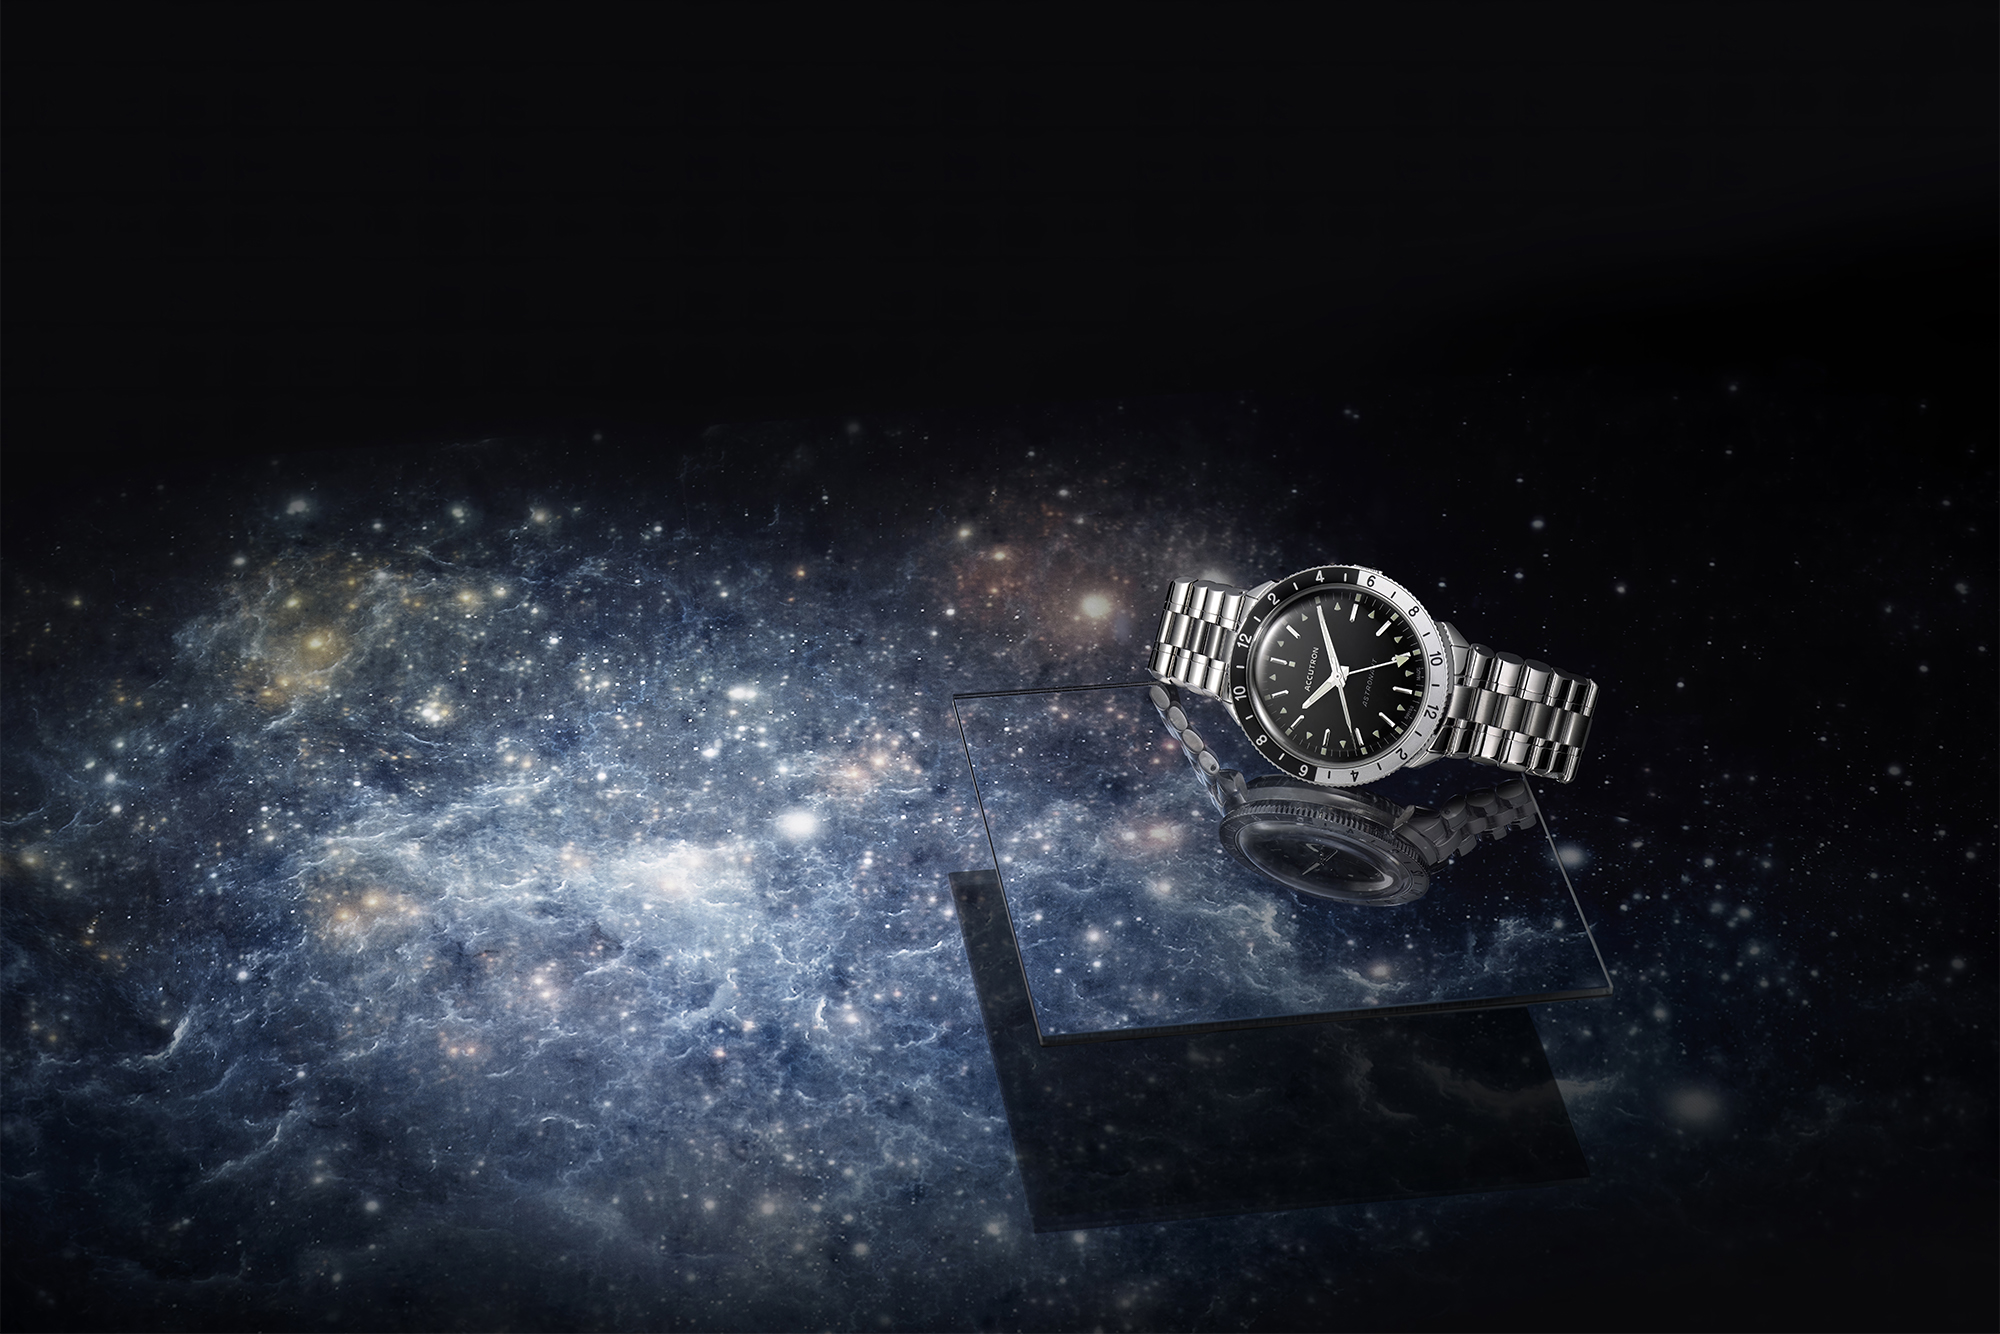 Accutron returns to the space age